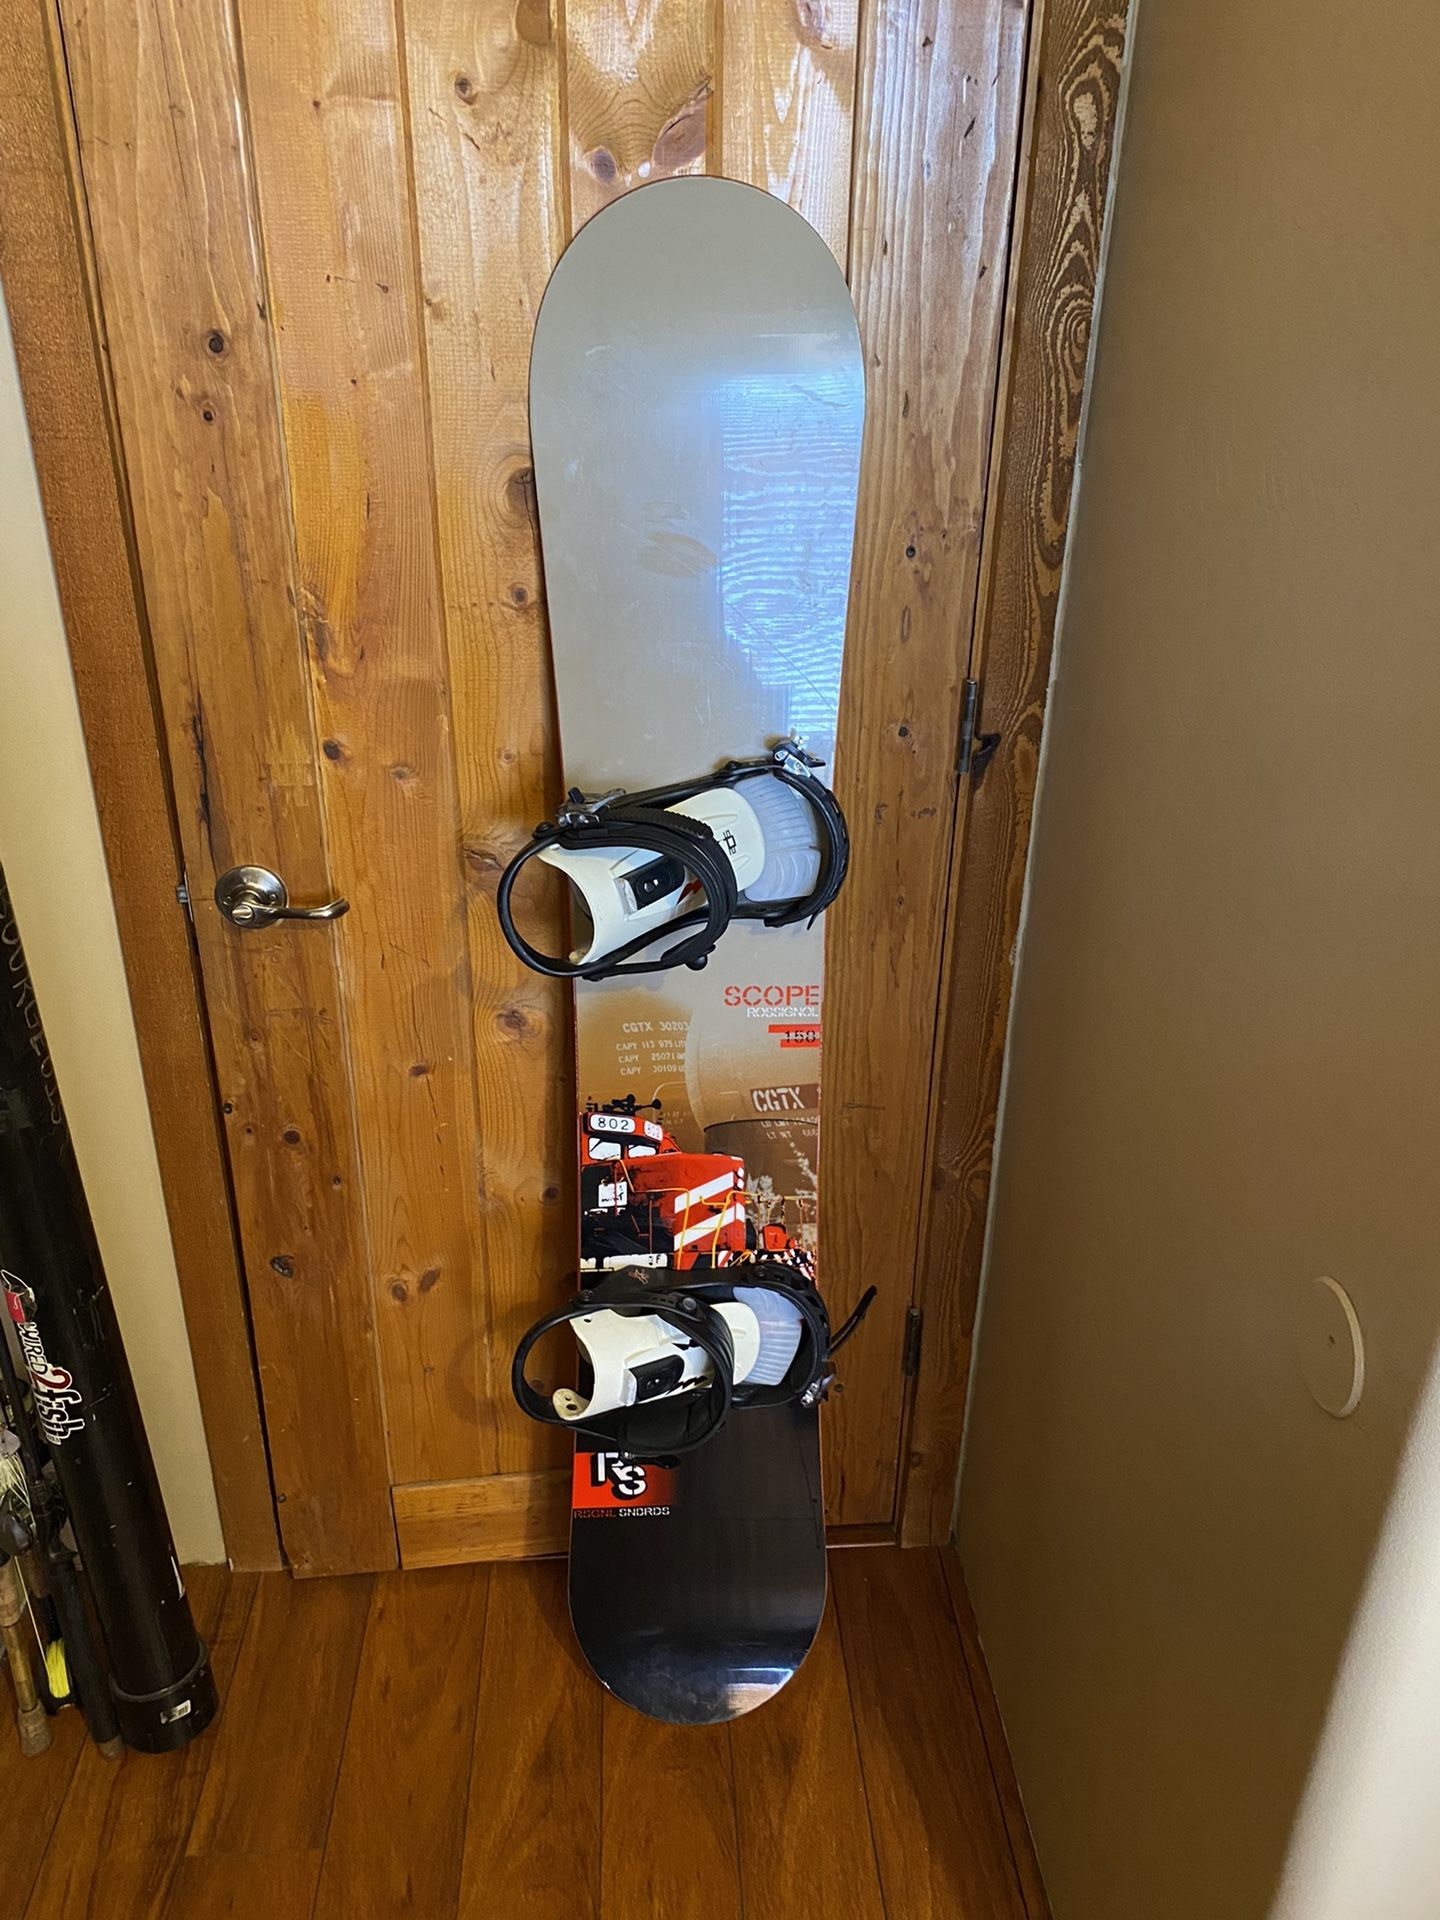 Ru Circus Pijler Rossignol Snowboard 158cm with Large Bindings for Sale in Mesa, AZ - OfferUp